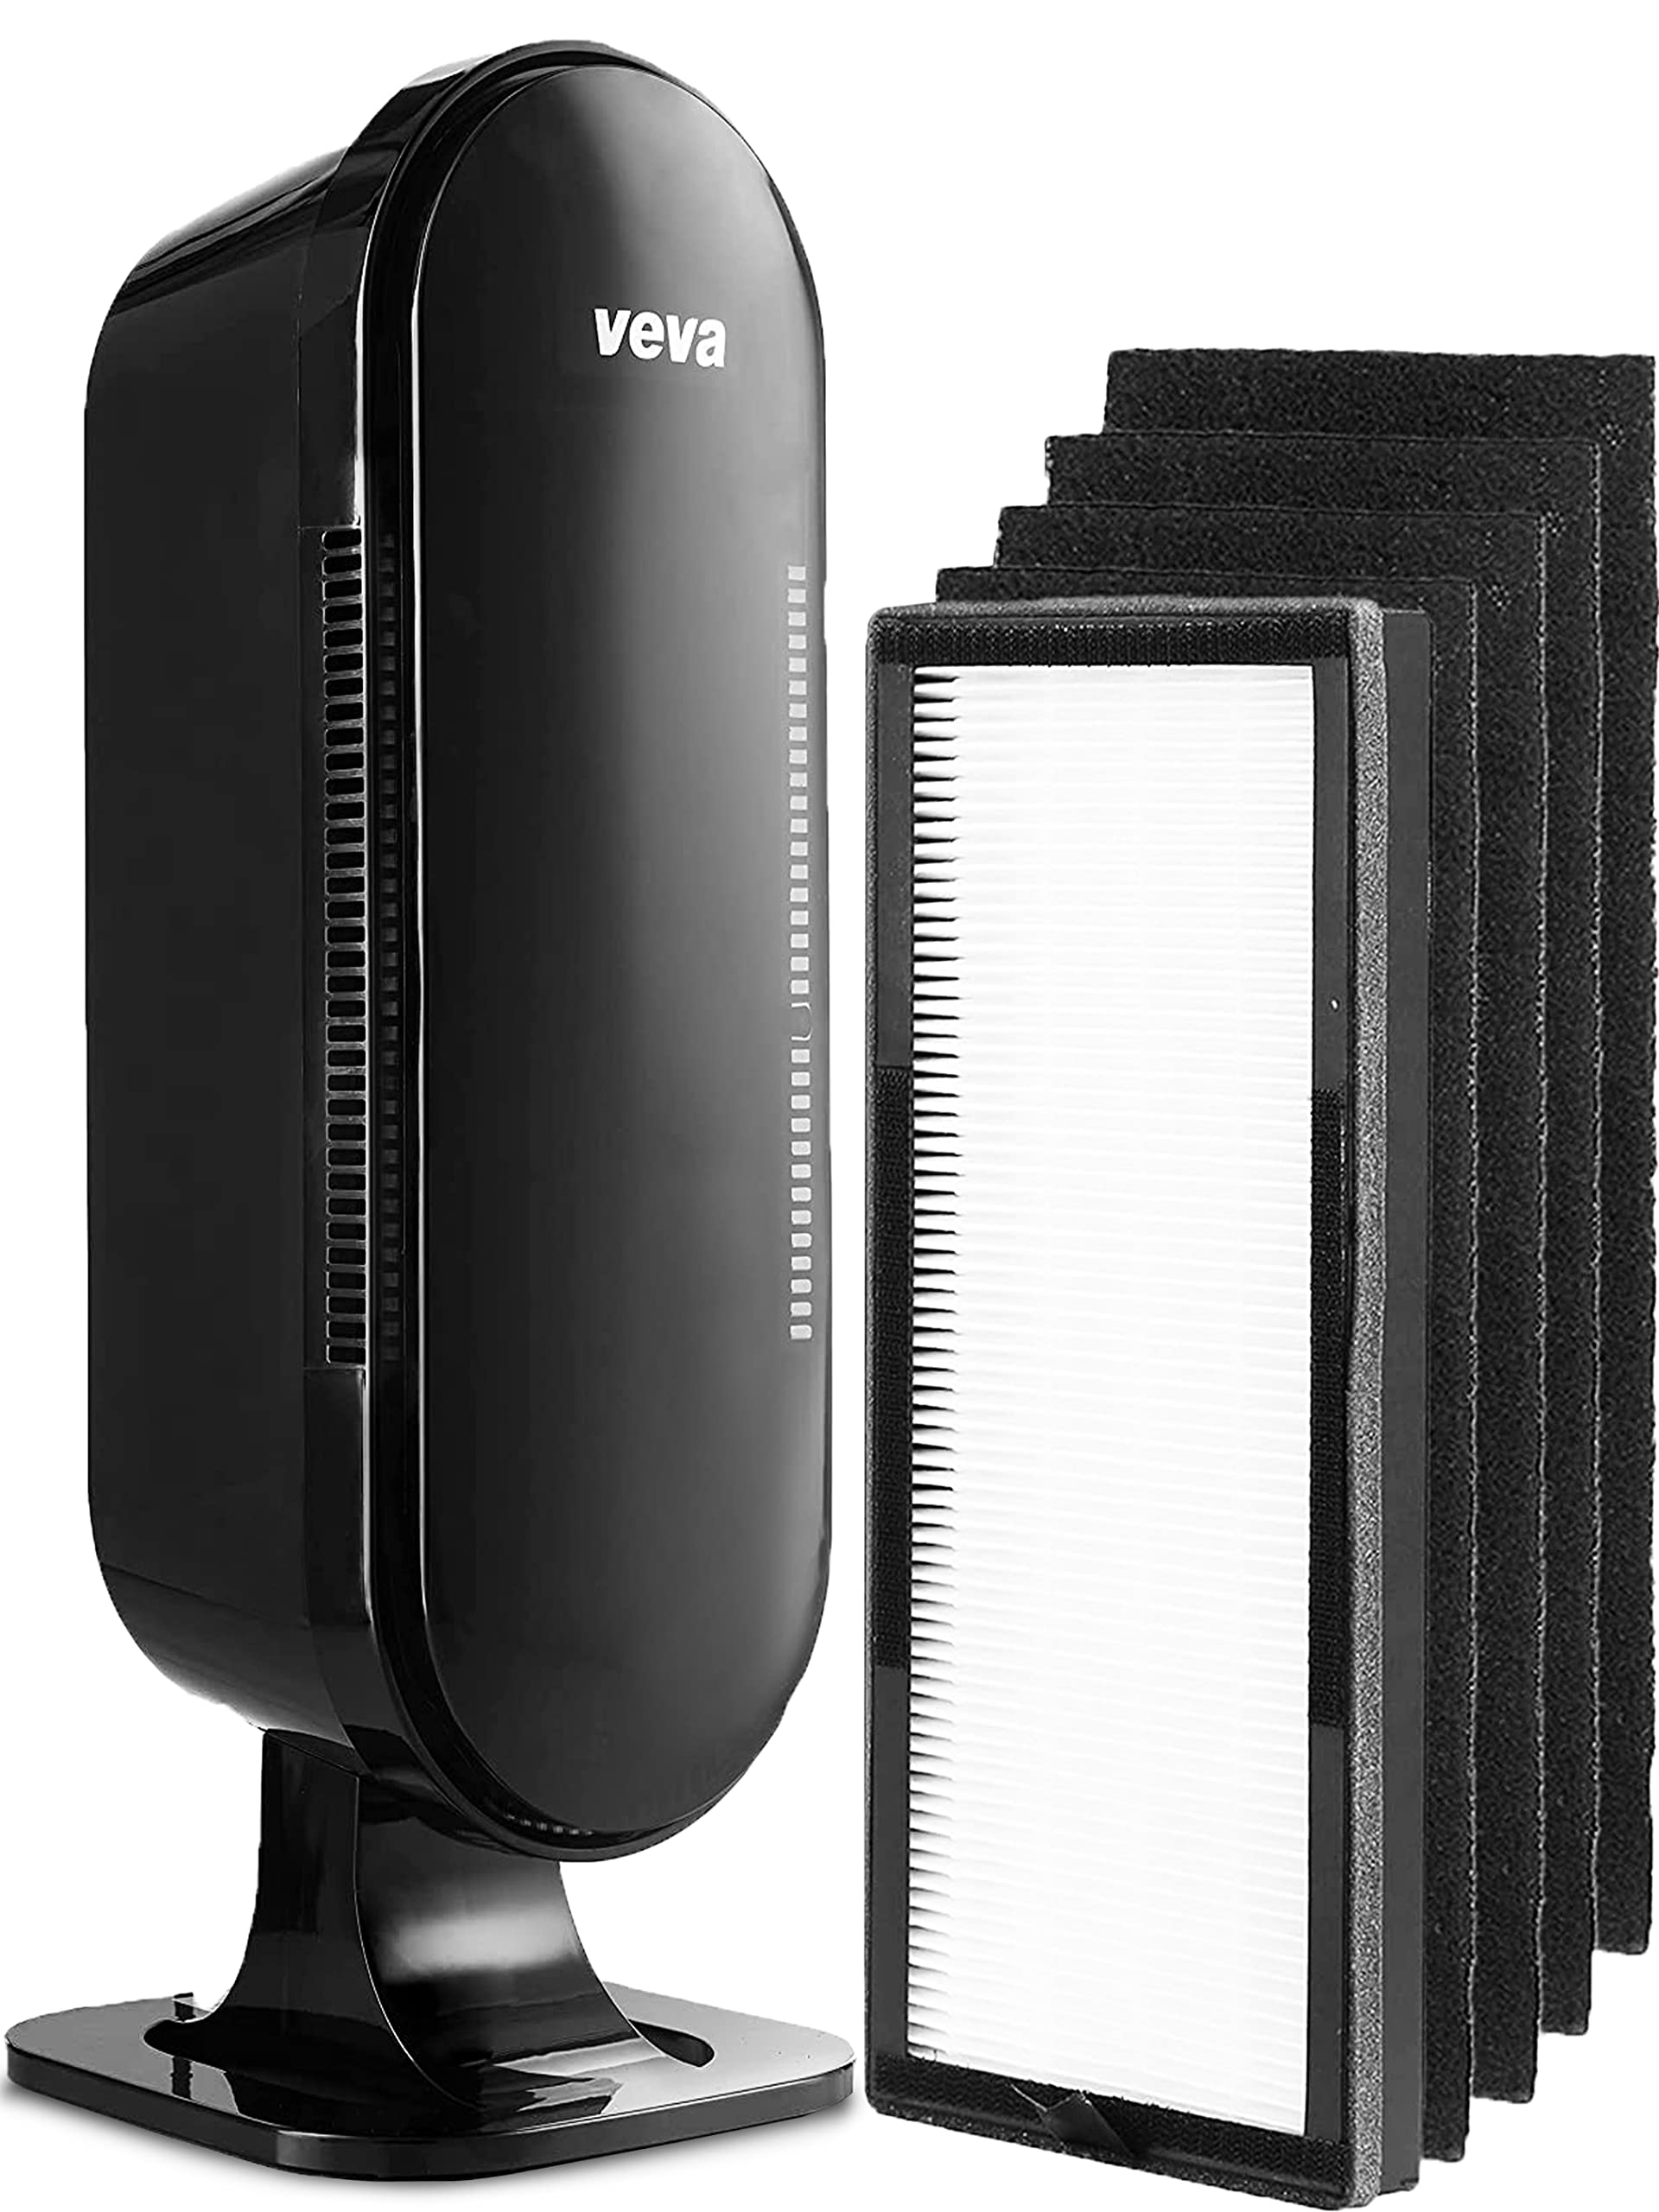 VEVA 8000 Black Air Purifier for Home, Pets Hair, Dander, Large Room, 325 Sq Ft., HEPA Filter & 4 Premium Activated Carbon Pre Filters Removes Allergens, Smoke, Dust, Pet & Odor for Home & Office